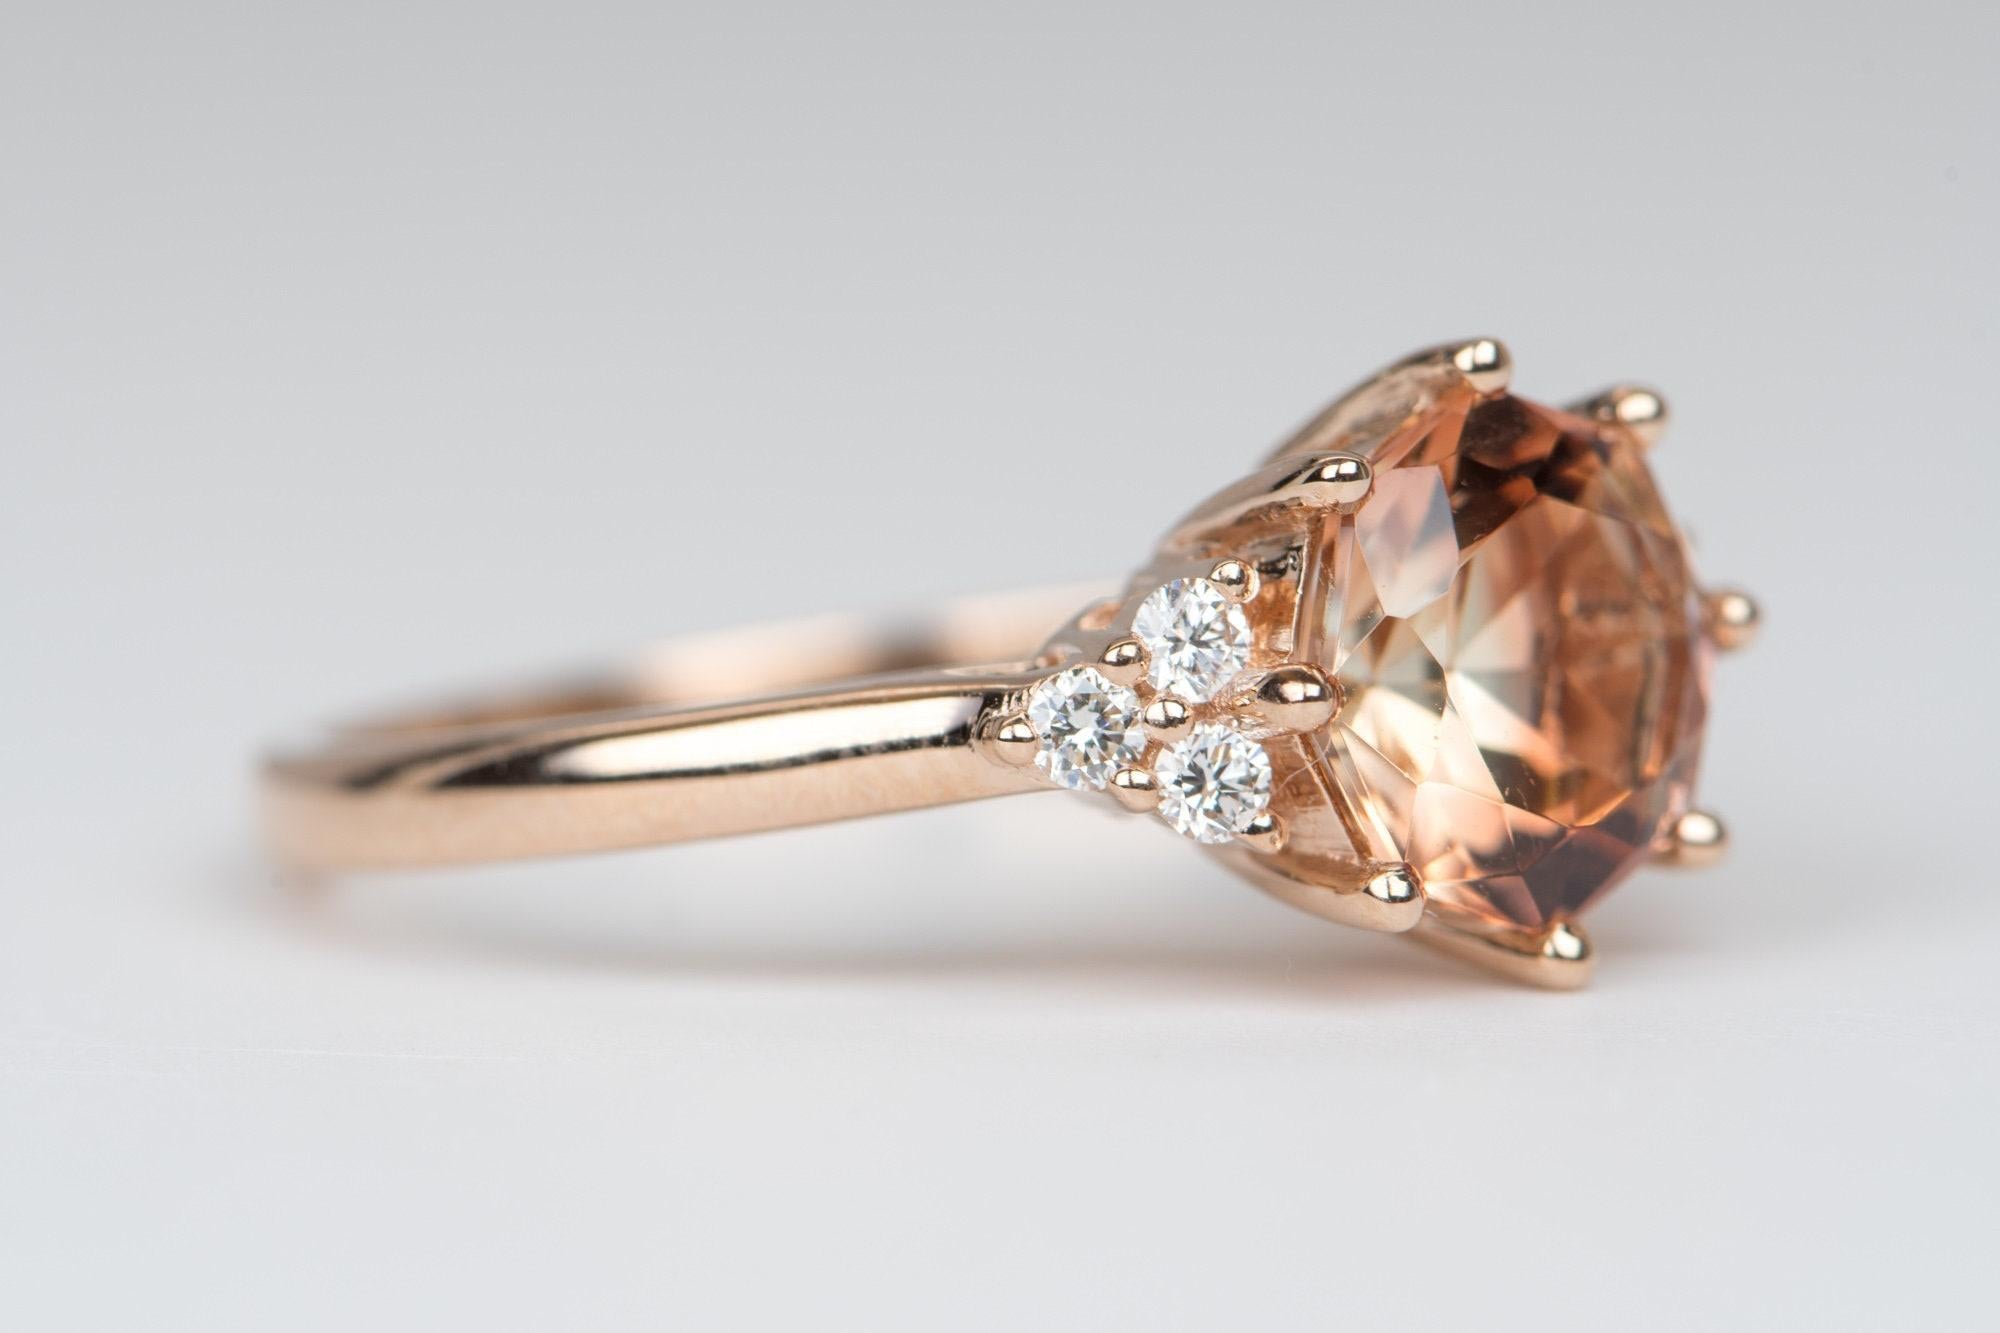 ♥  Solid 14K rose gold ring set with an orange octagon Oregon sunstone center, flanked with a trio of diamonds on each side. 
♥  The overall setting measures 15.09mm wide, 9.8mm in length, and sits 6.8mm tall from the finger

♥  Ring size: US Size 7